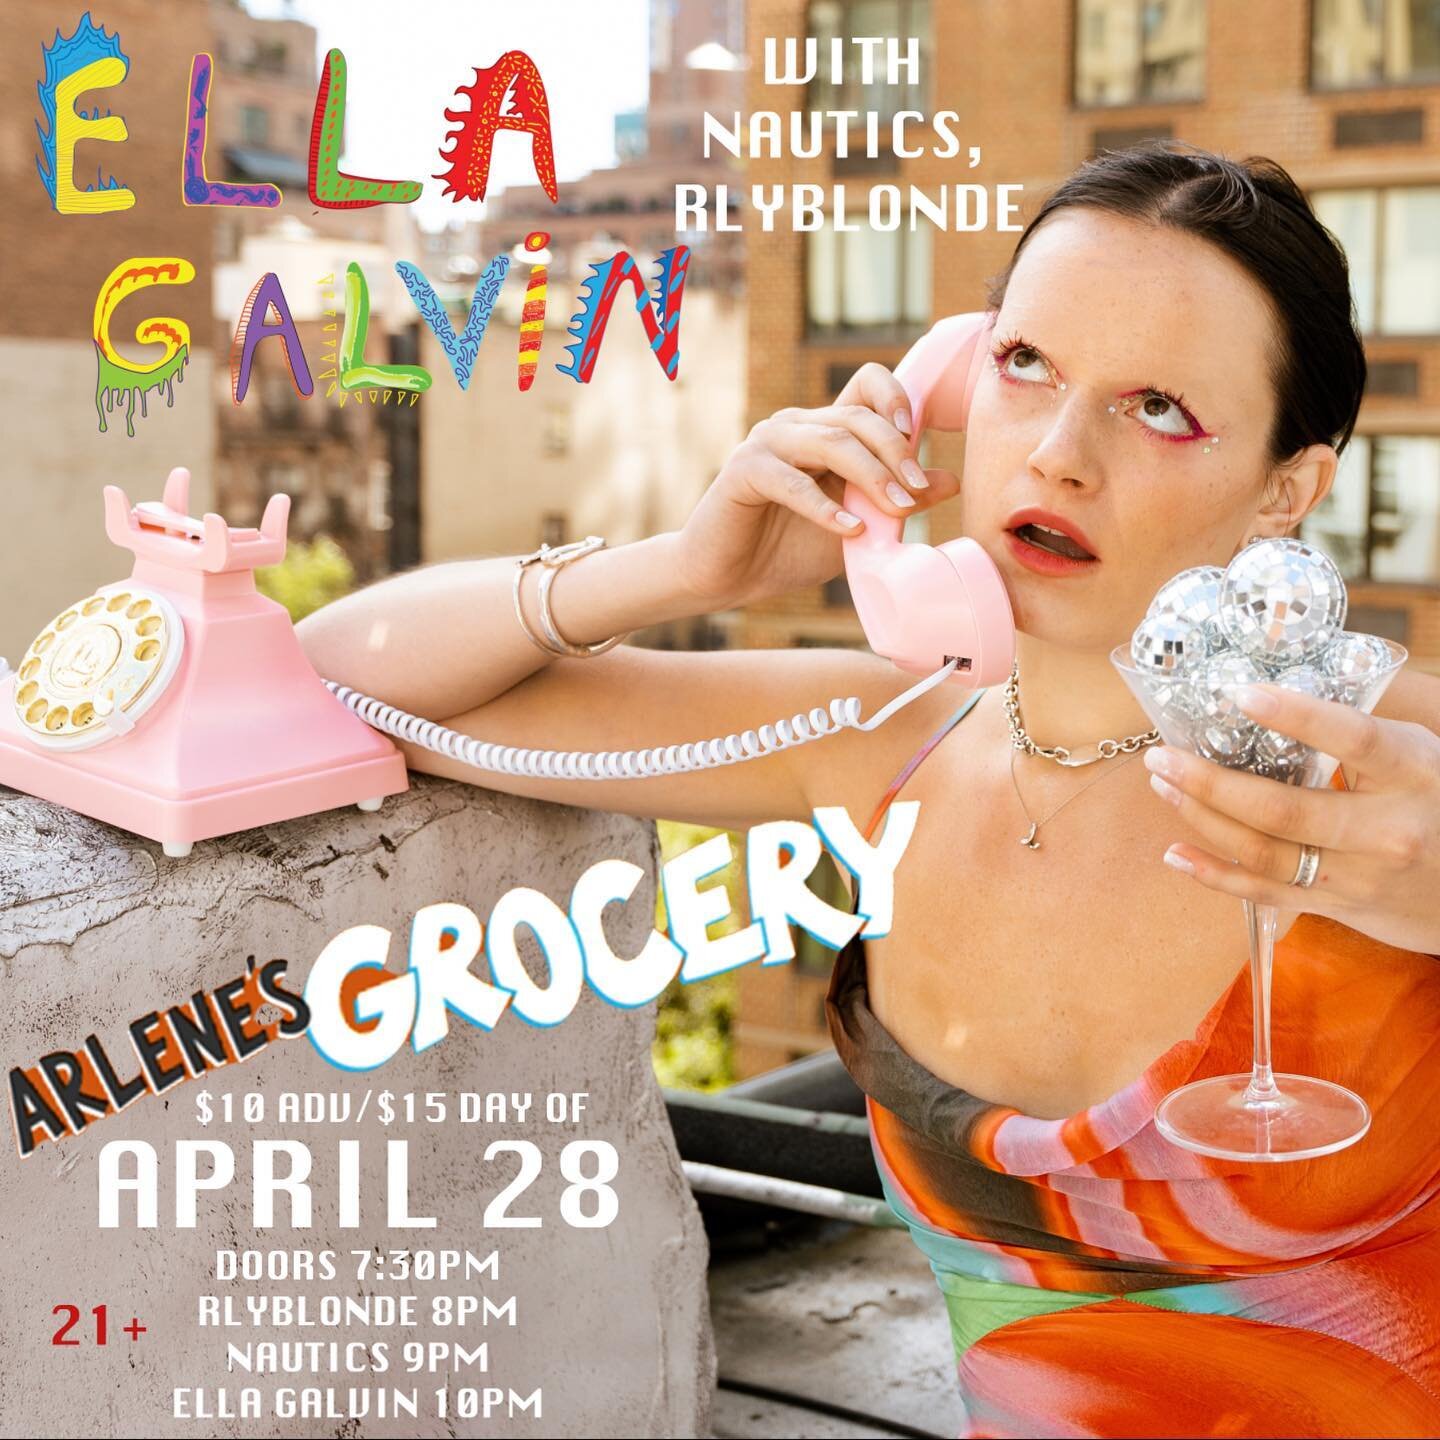 UHOH!! ITS TIME FOR A *SPECIAL* SPRING SHOW🌸🌼🌱💕 ARLENES GROCERY. APRIL 28th. gonna be a HANG. Ticket link in bio babyyy 😘what makes this one special??? Stay tuneddd ✨